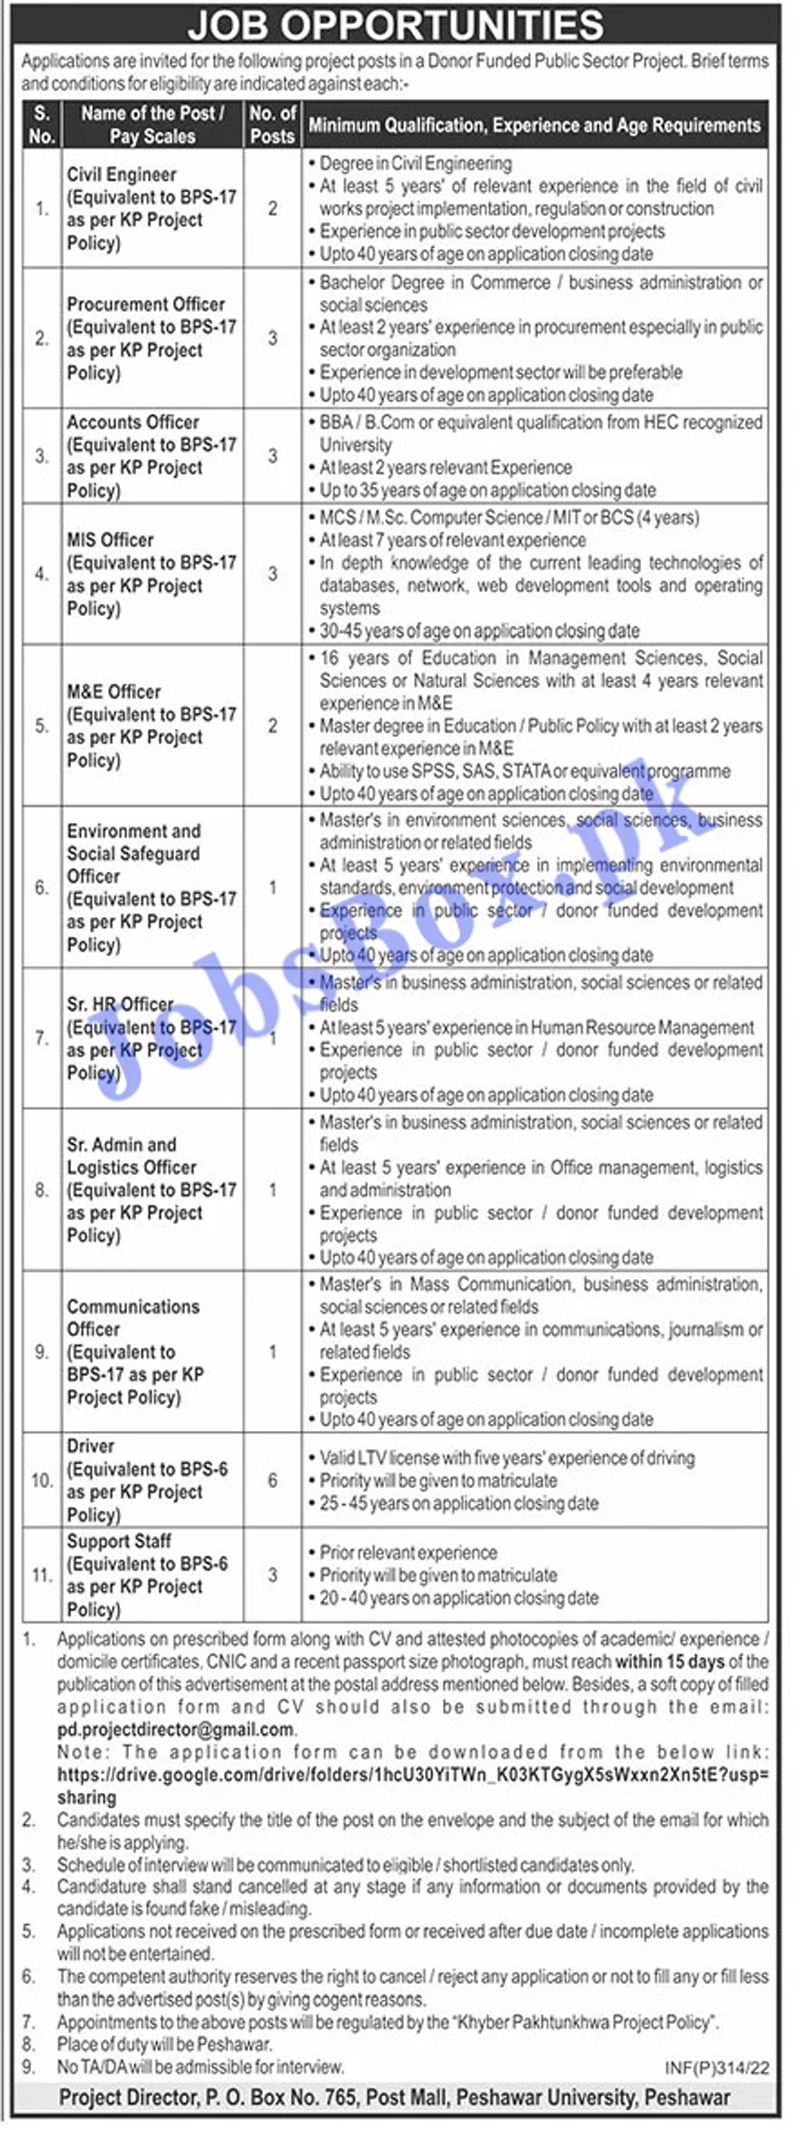 PO Box 765 Peshawar Jobs 2022 in Donor Funded Project